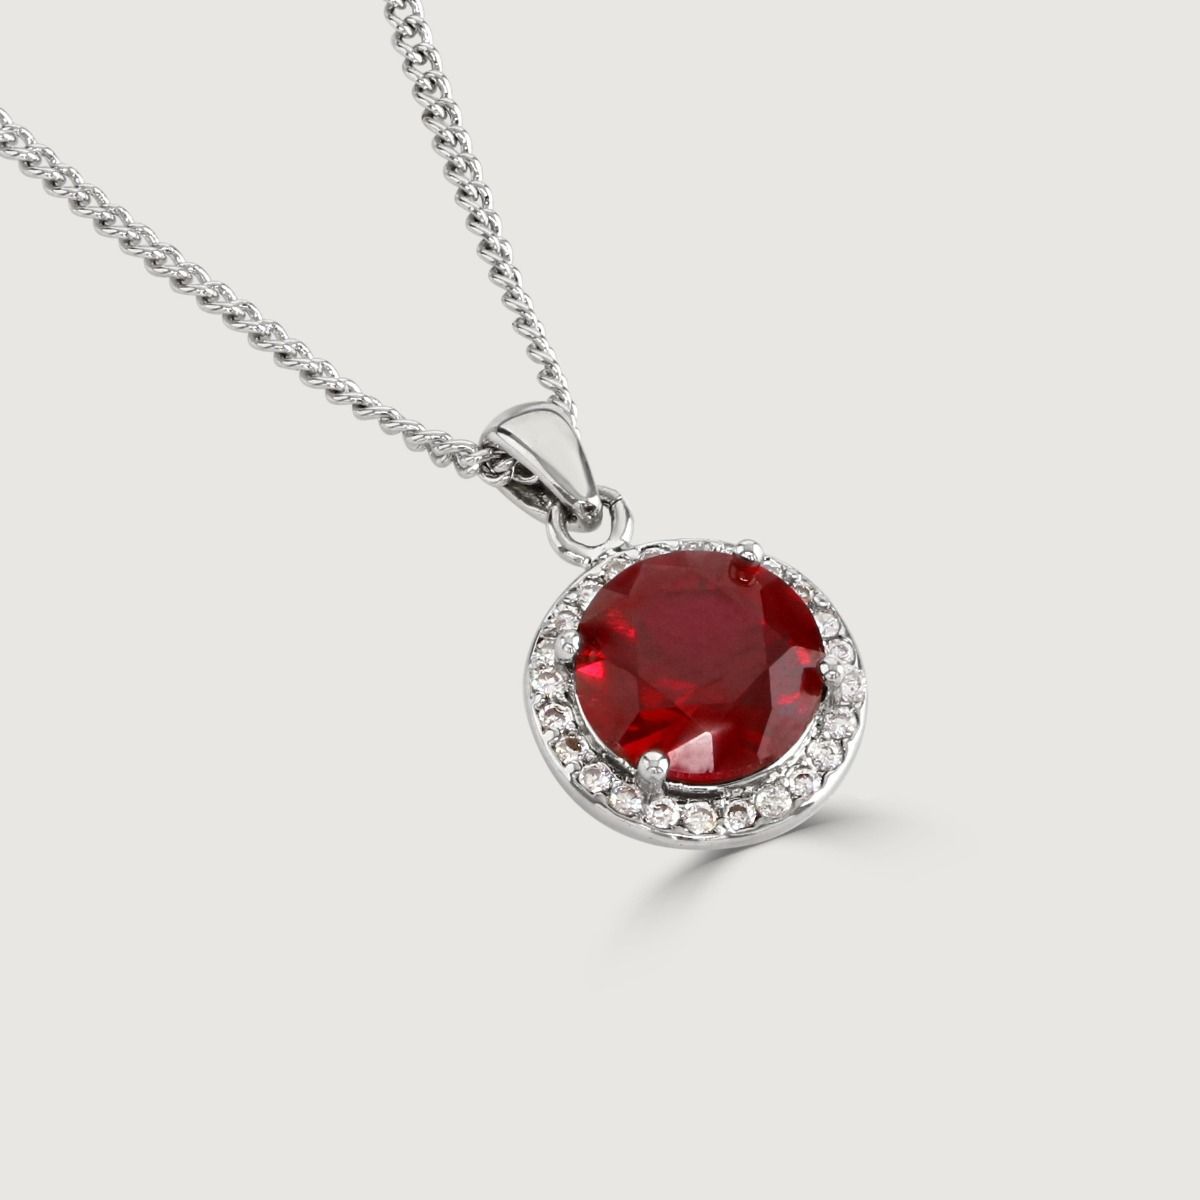 Experience enchantment through our Ruby Halo Pendant. The impressive round-cut centre stone emanates a captivating allure. Effortlessly elevate your style with this exquisite piece, infusing timeless glamour into any ensemble.